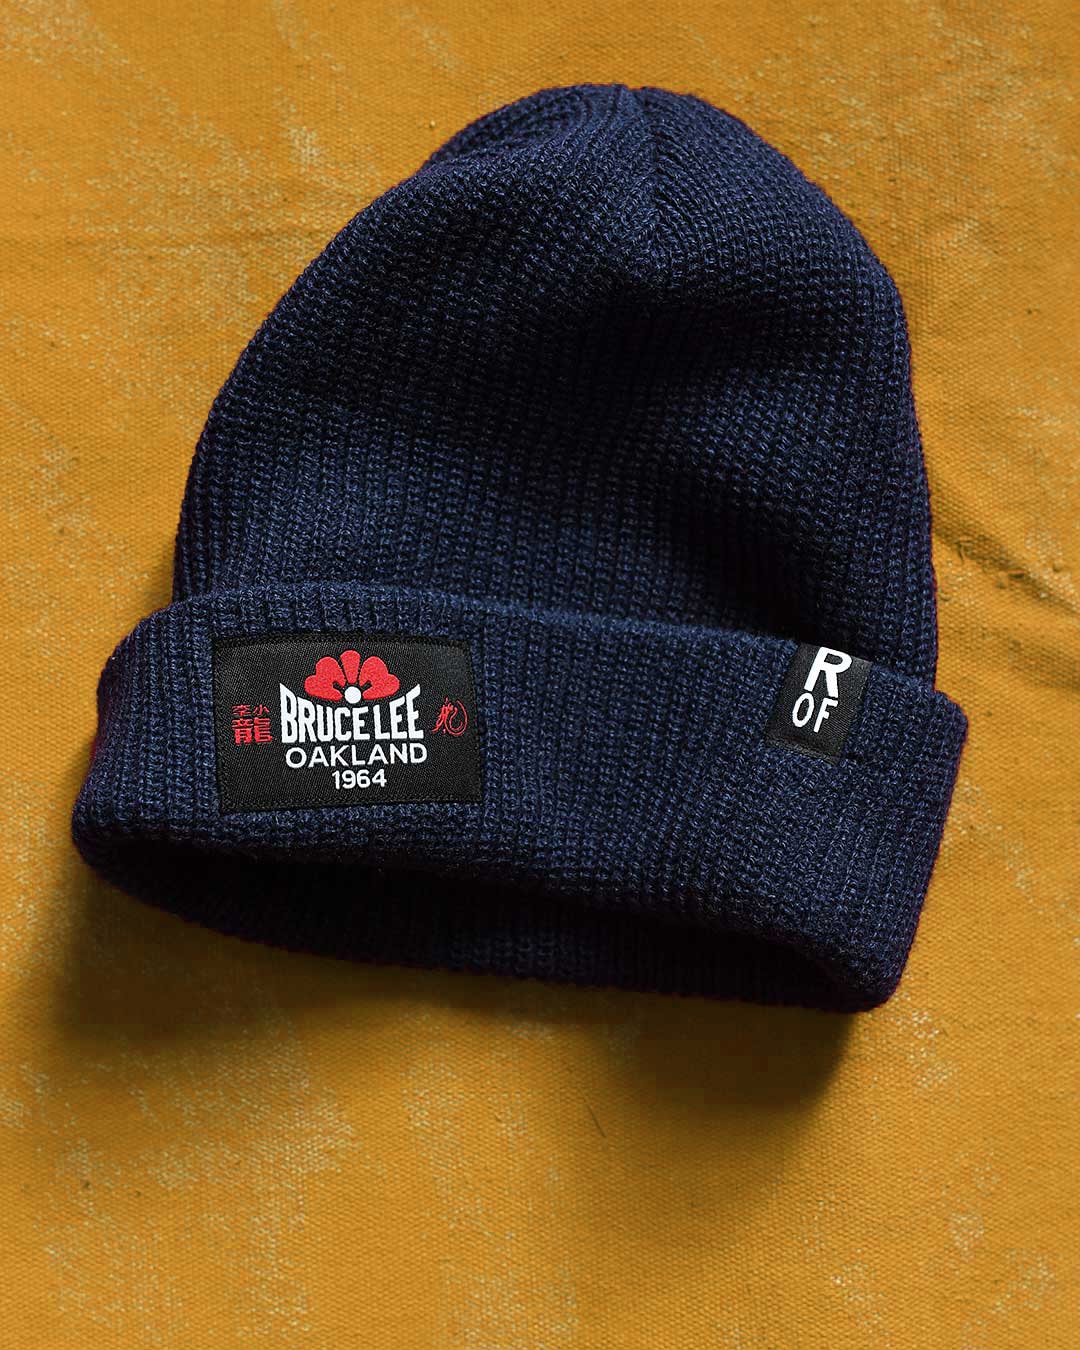 Bruce Lee Oakland 1964 Navy Beanie - Roots of Fight